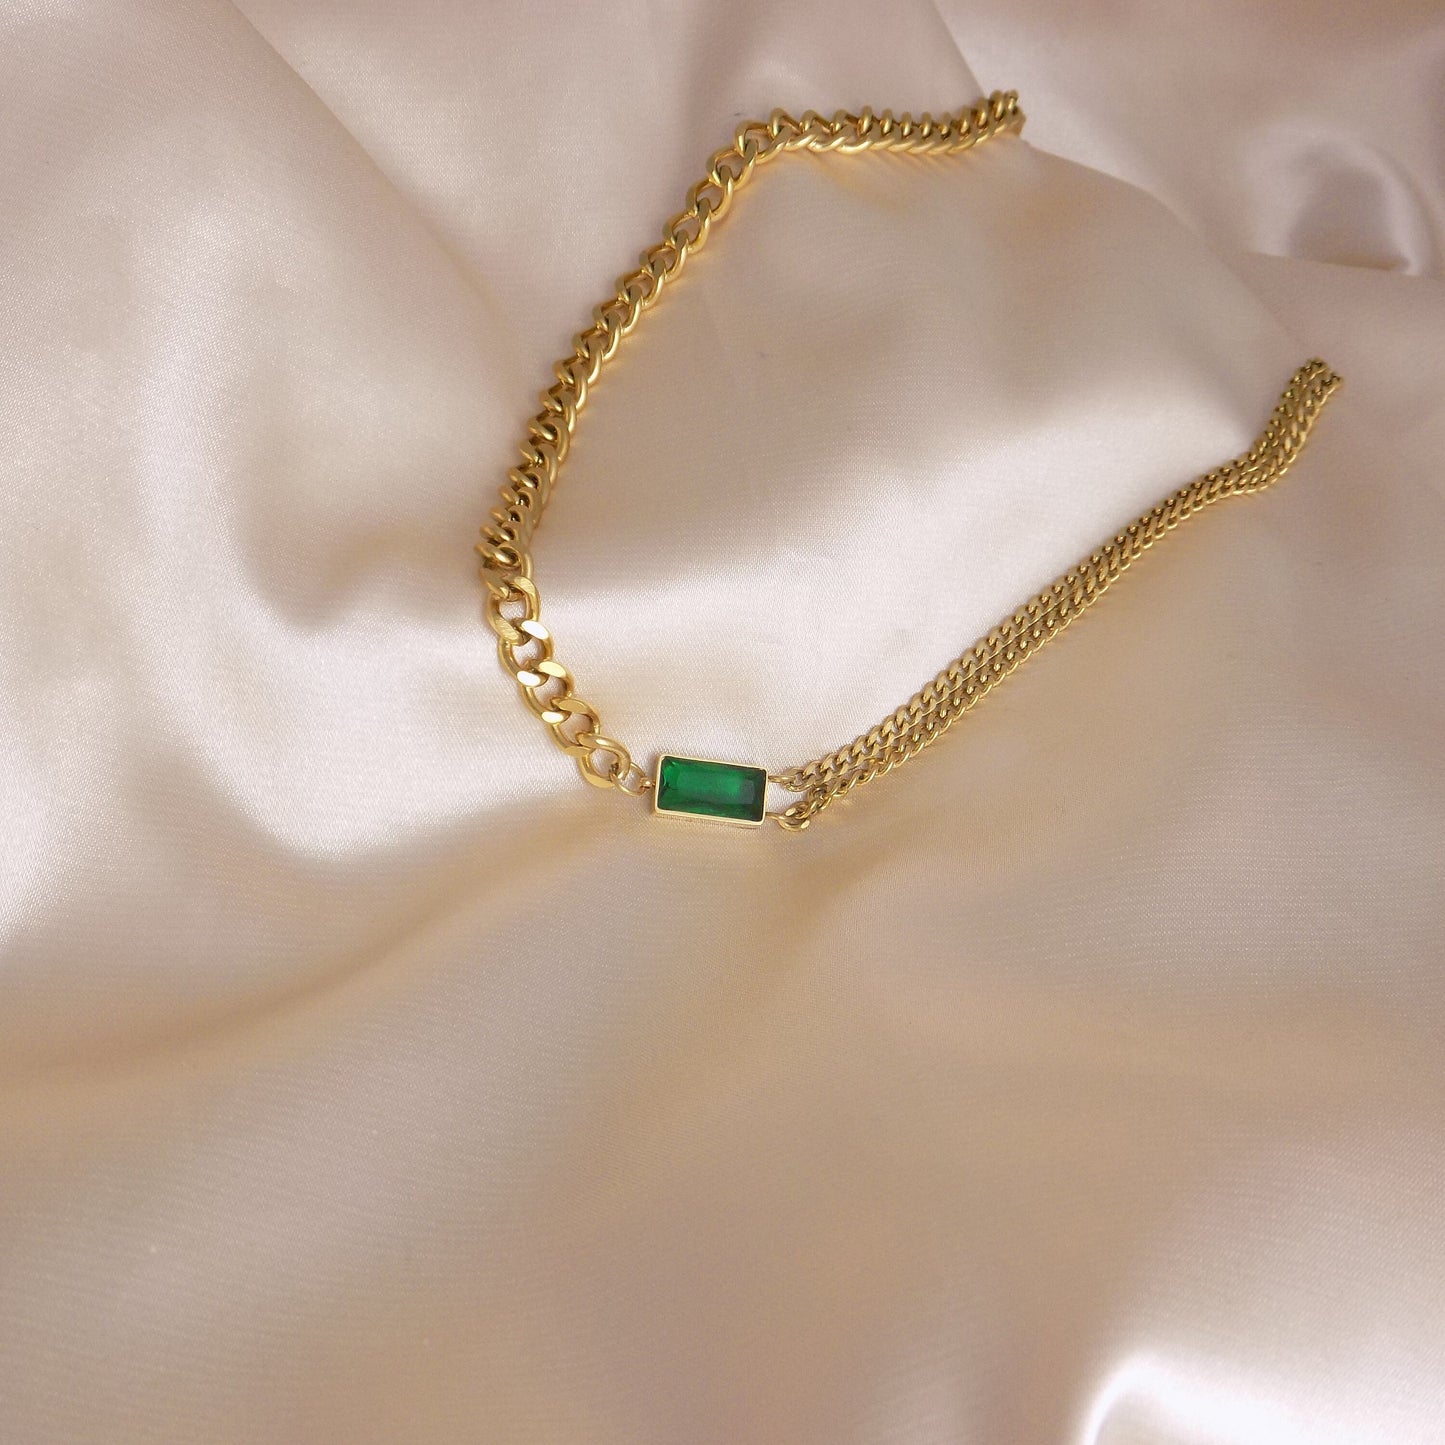 Unique Choker Necklace 18K Gold Stainless Steel - Emerald Green Rectangle Crystal